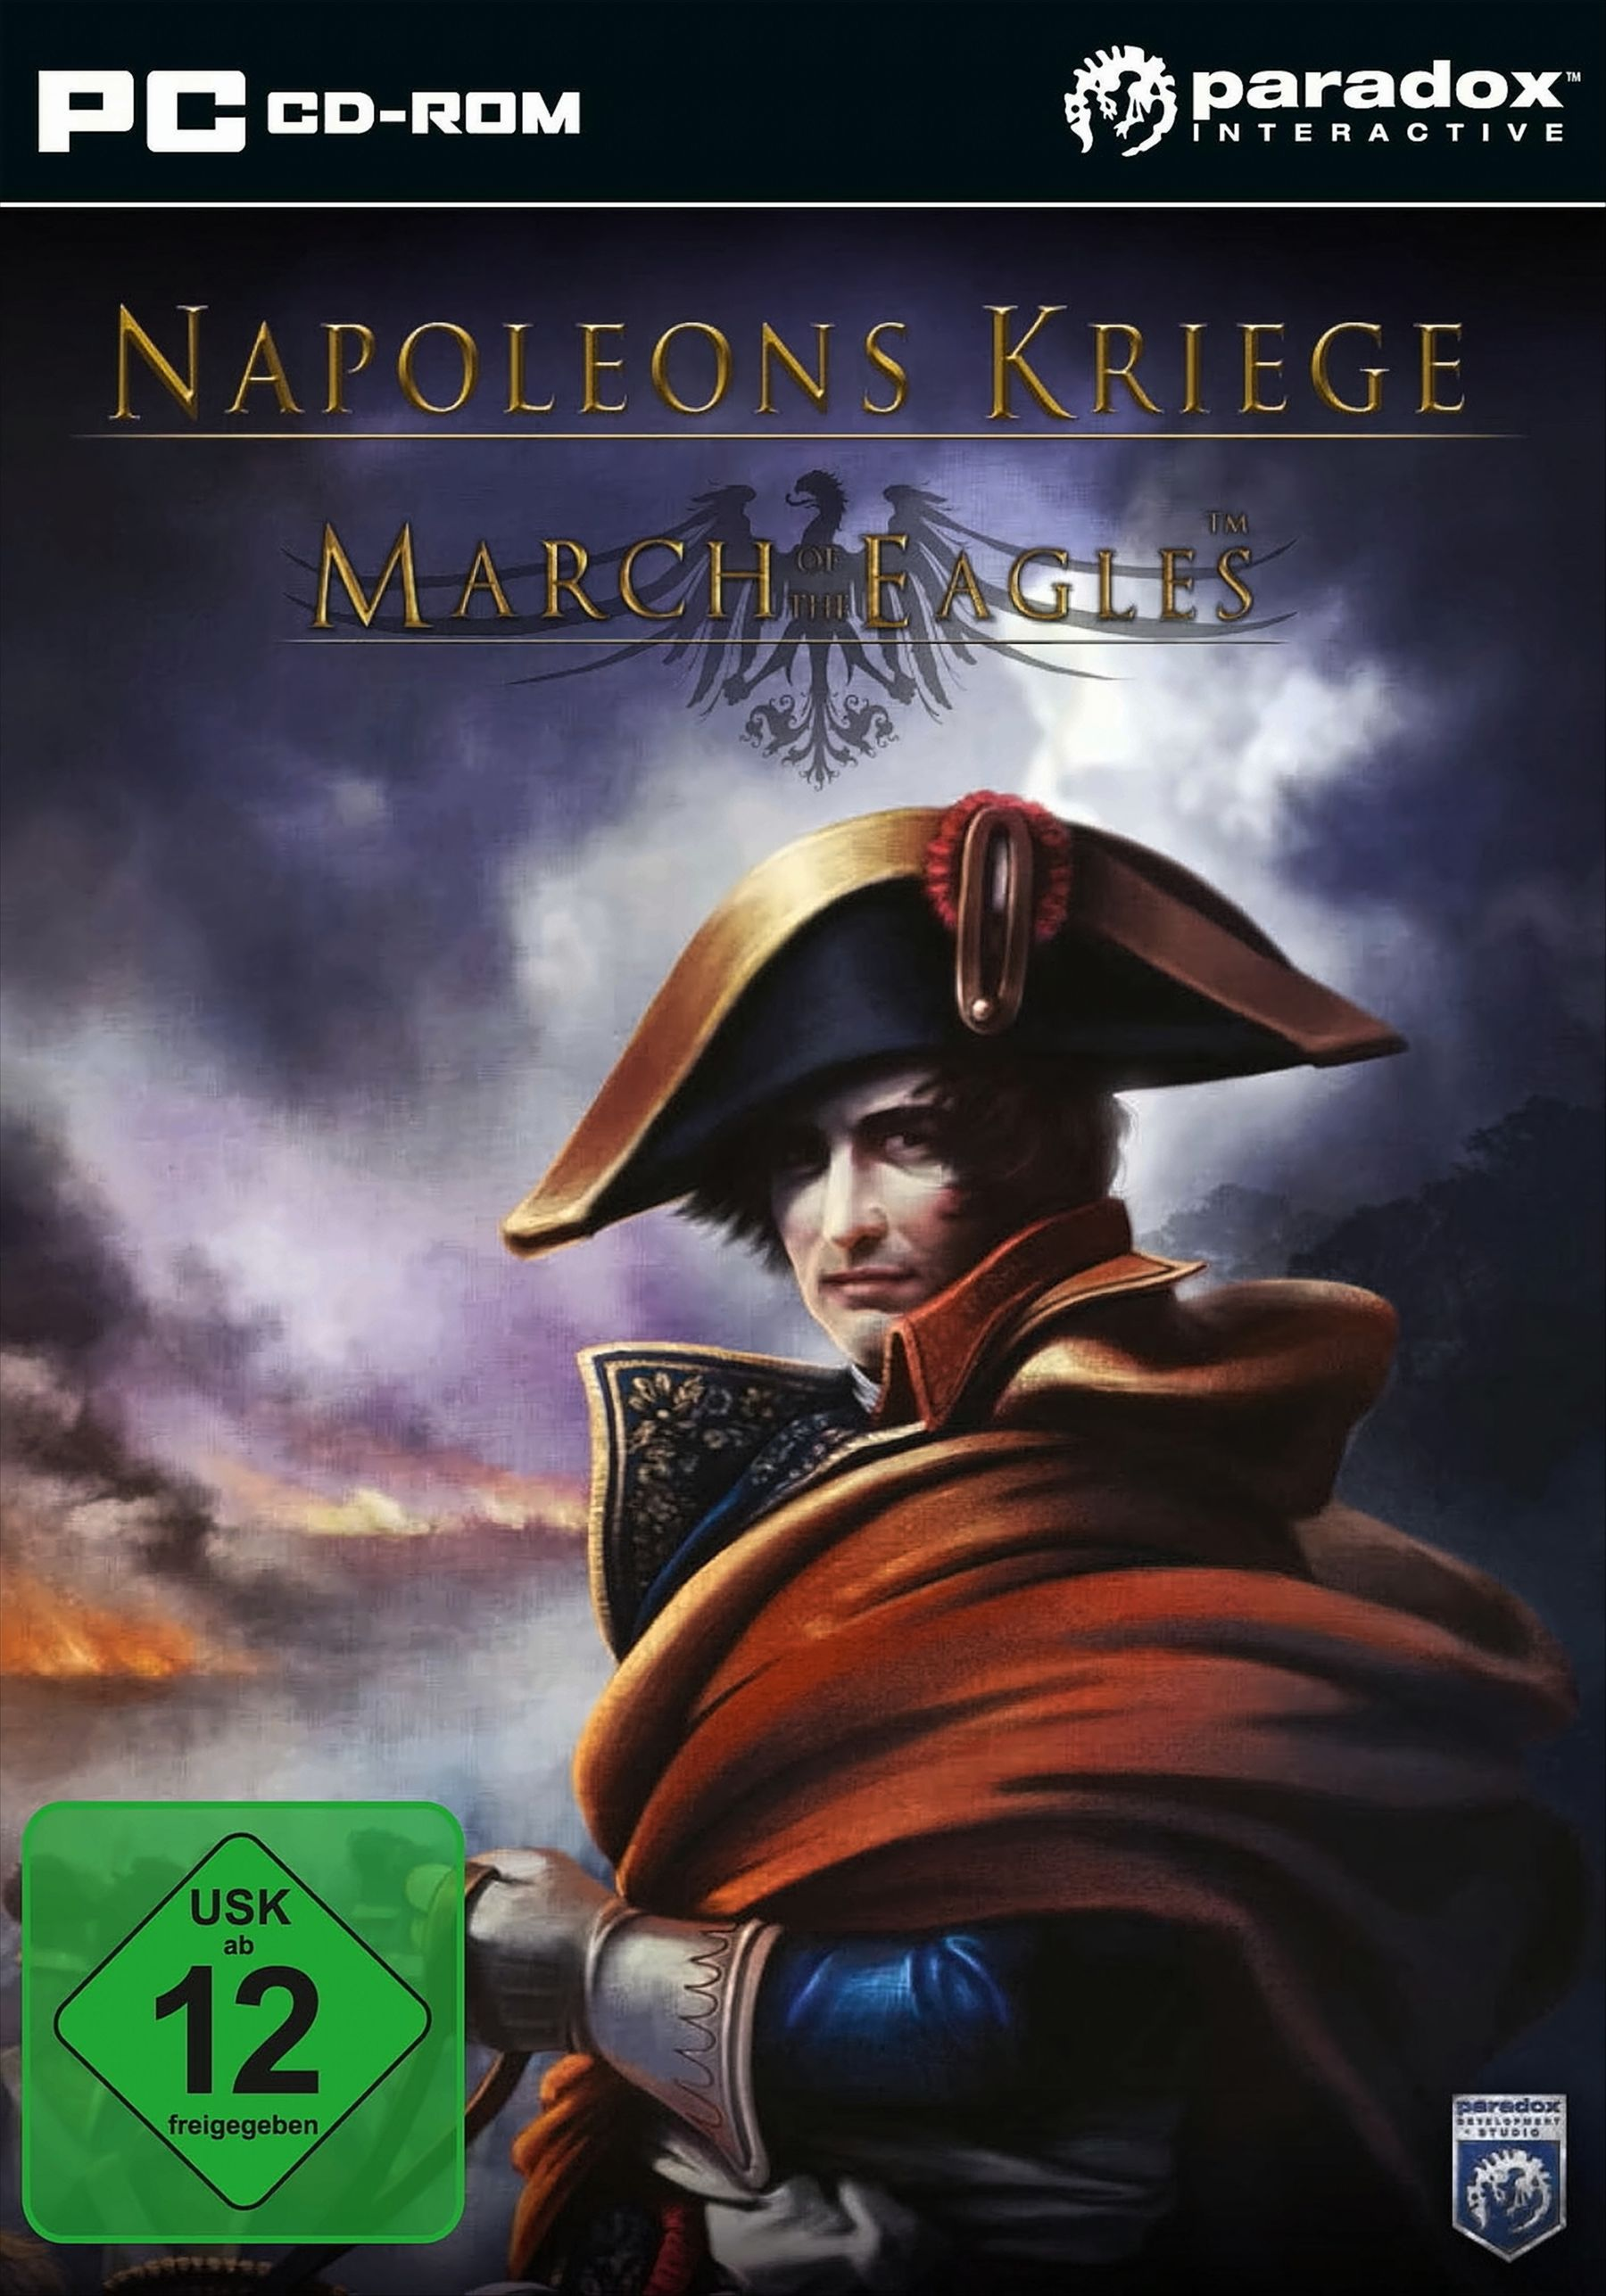 Napoleons Kriege: March Of - Eagles [PC] The